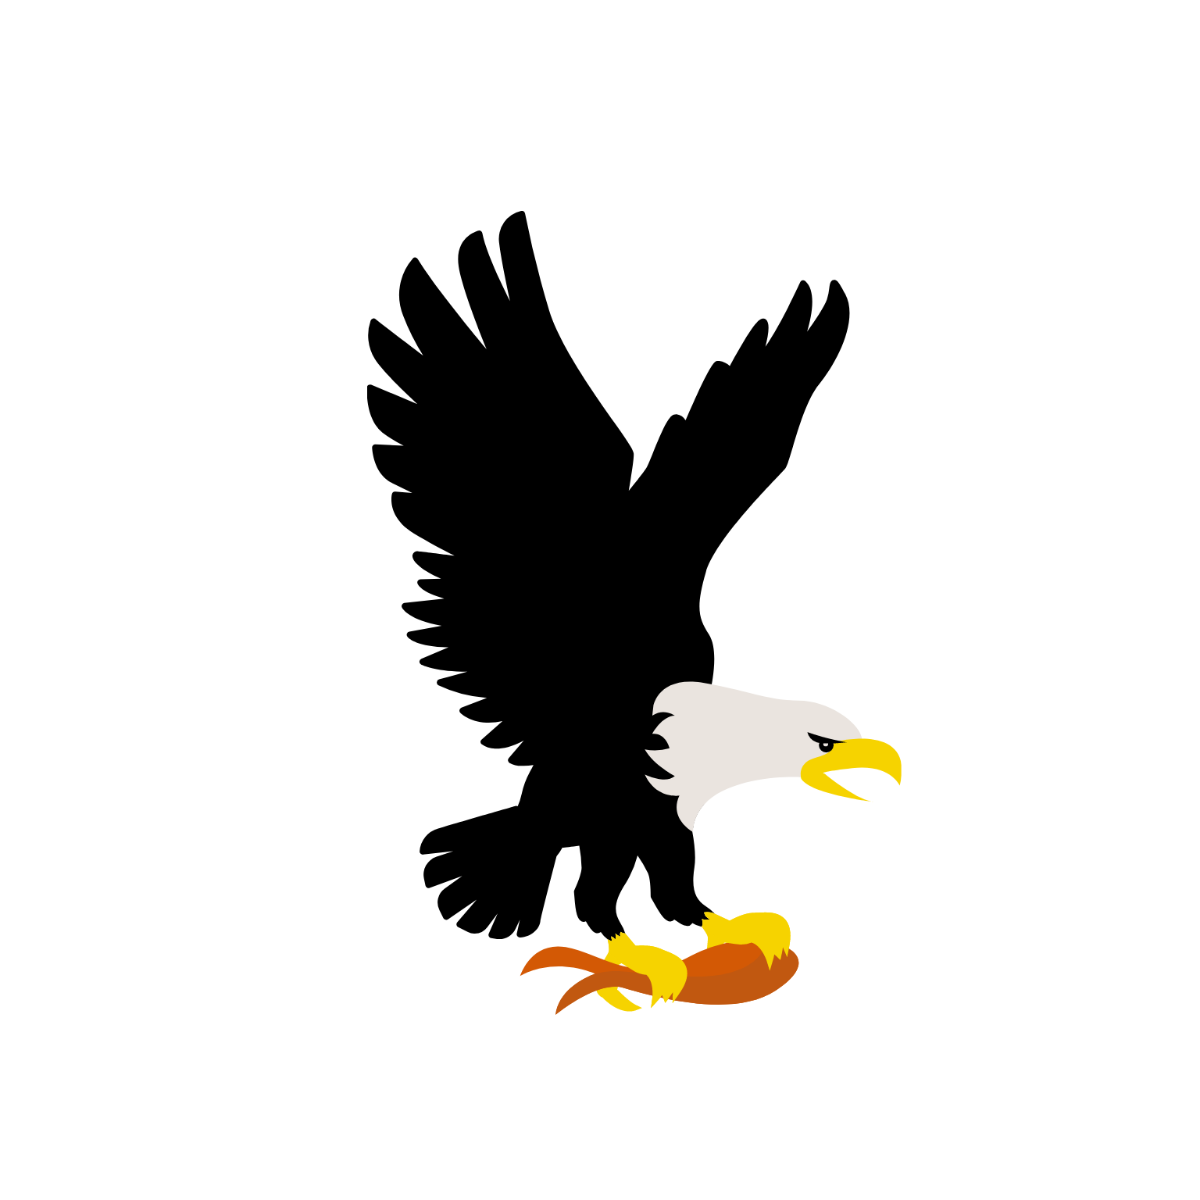 Eating Eagle Vector Template